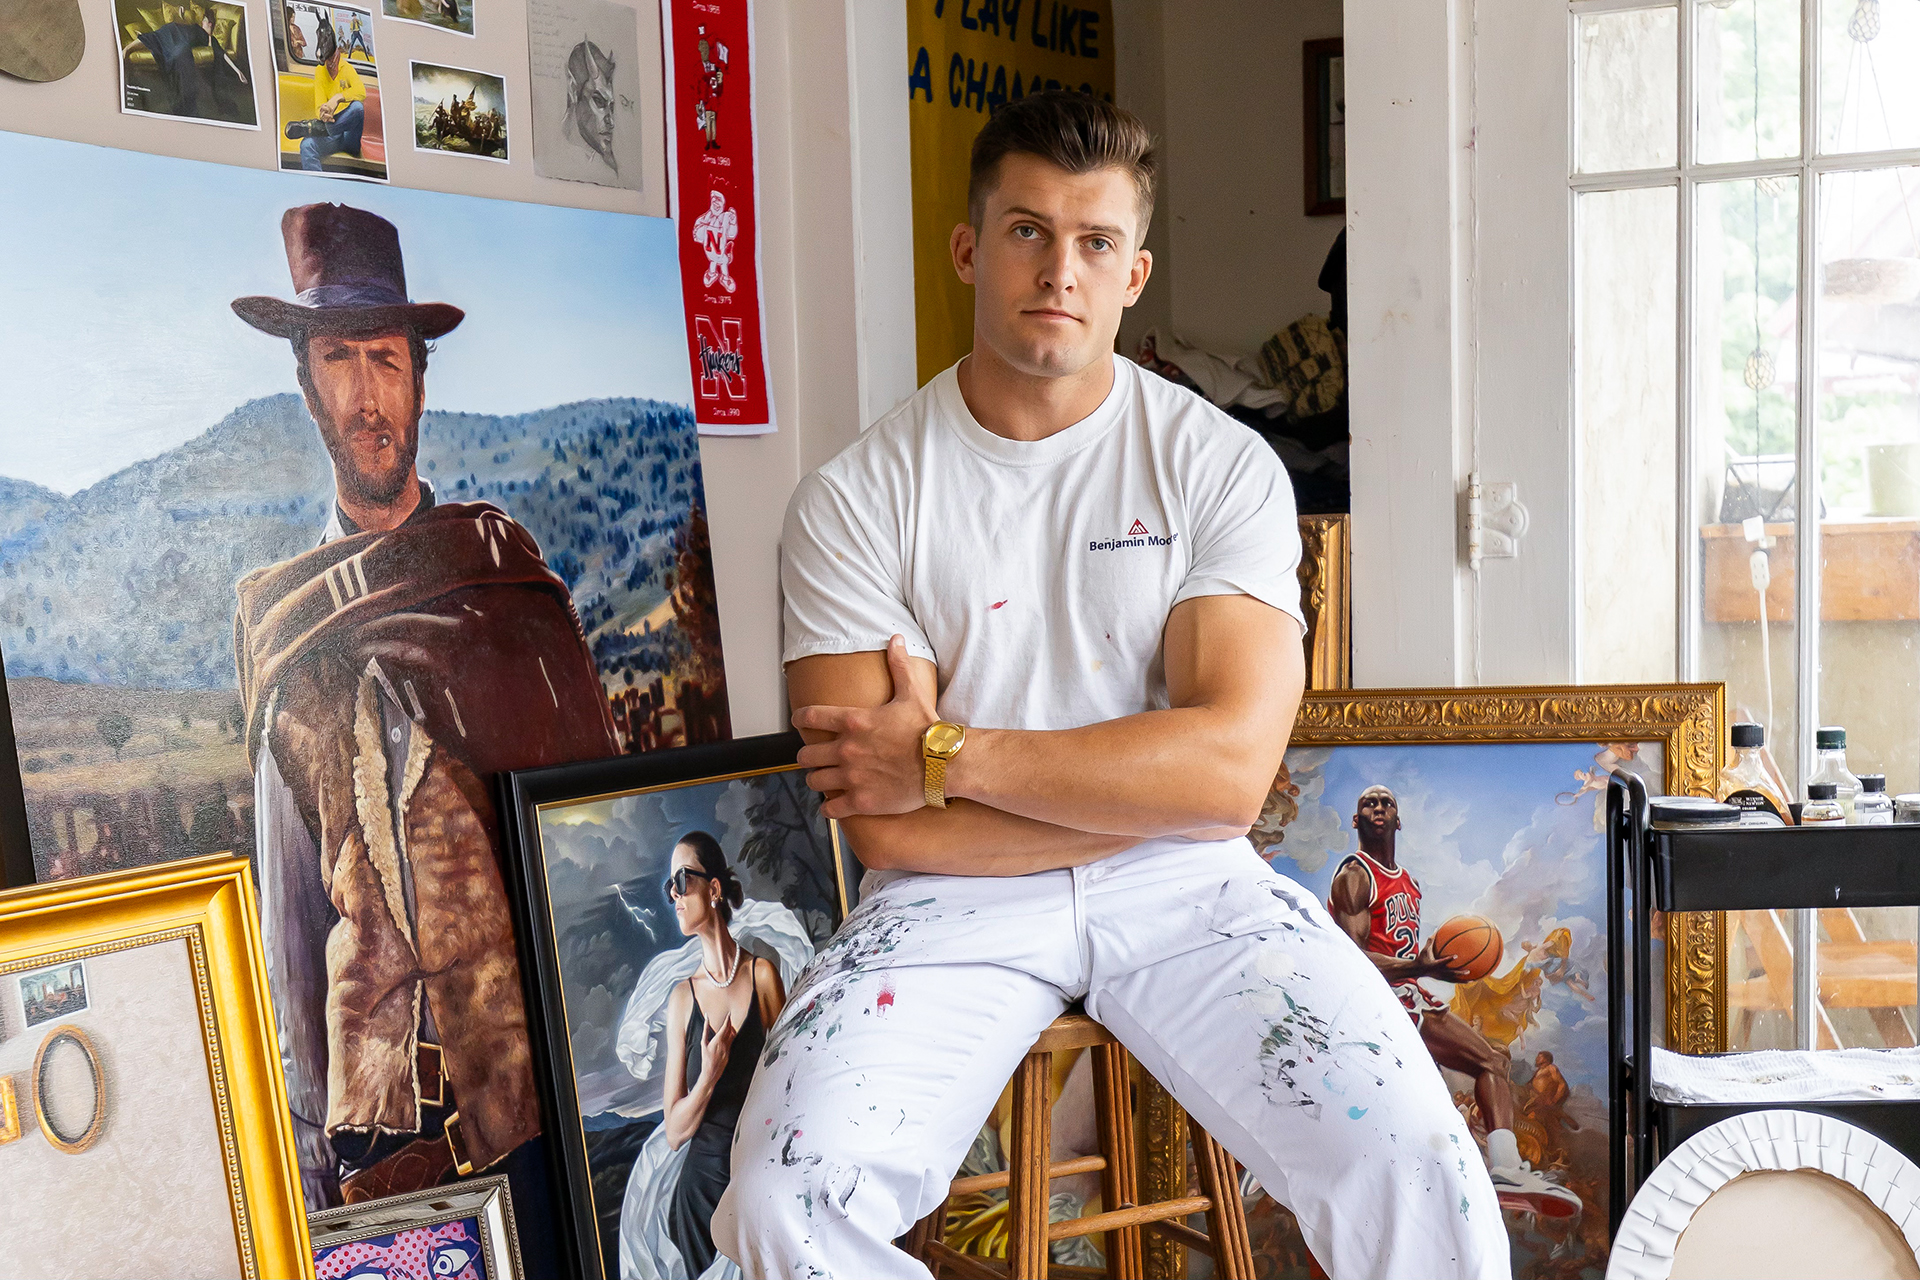 Artist and Kendall College of Art and Design of Ferris State University graduate Jackson Wrede's personal approach to portraiture has garnered him a growing a reputation as one of the most talented up-and-coming artists working today.